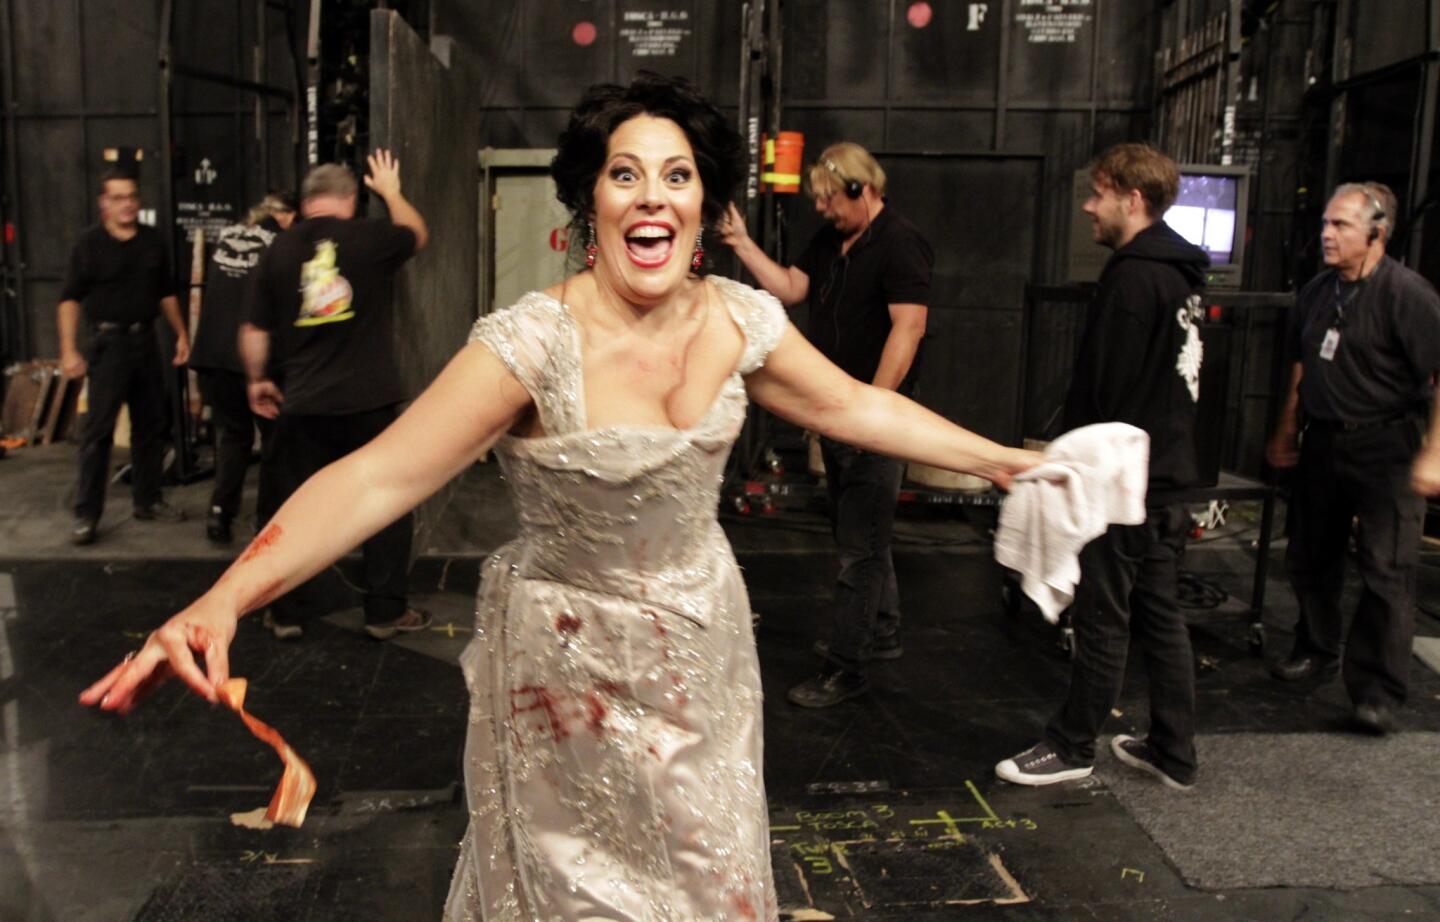 Soprano Sondra Radvanovsky, singing the role of Tosca, coming off stage after a gory scene in the L.A. Opera's performance of "Tosca."